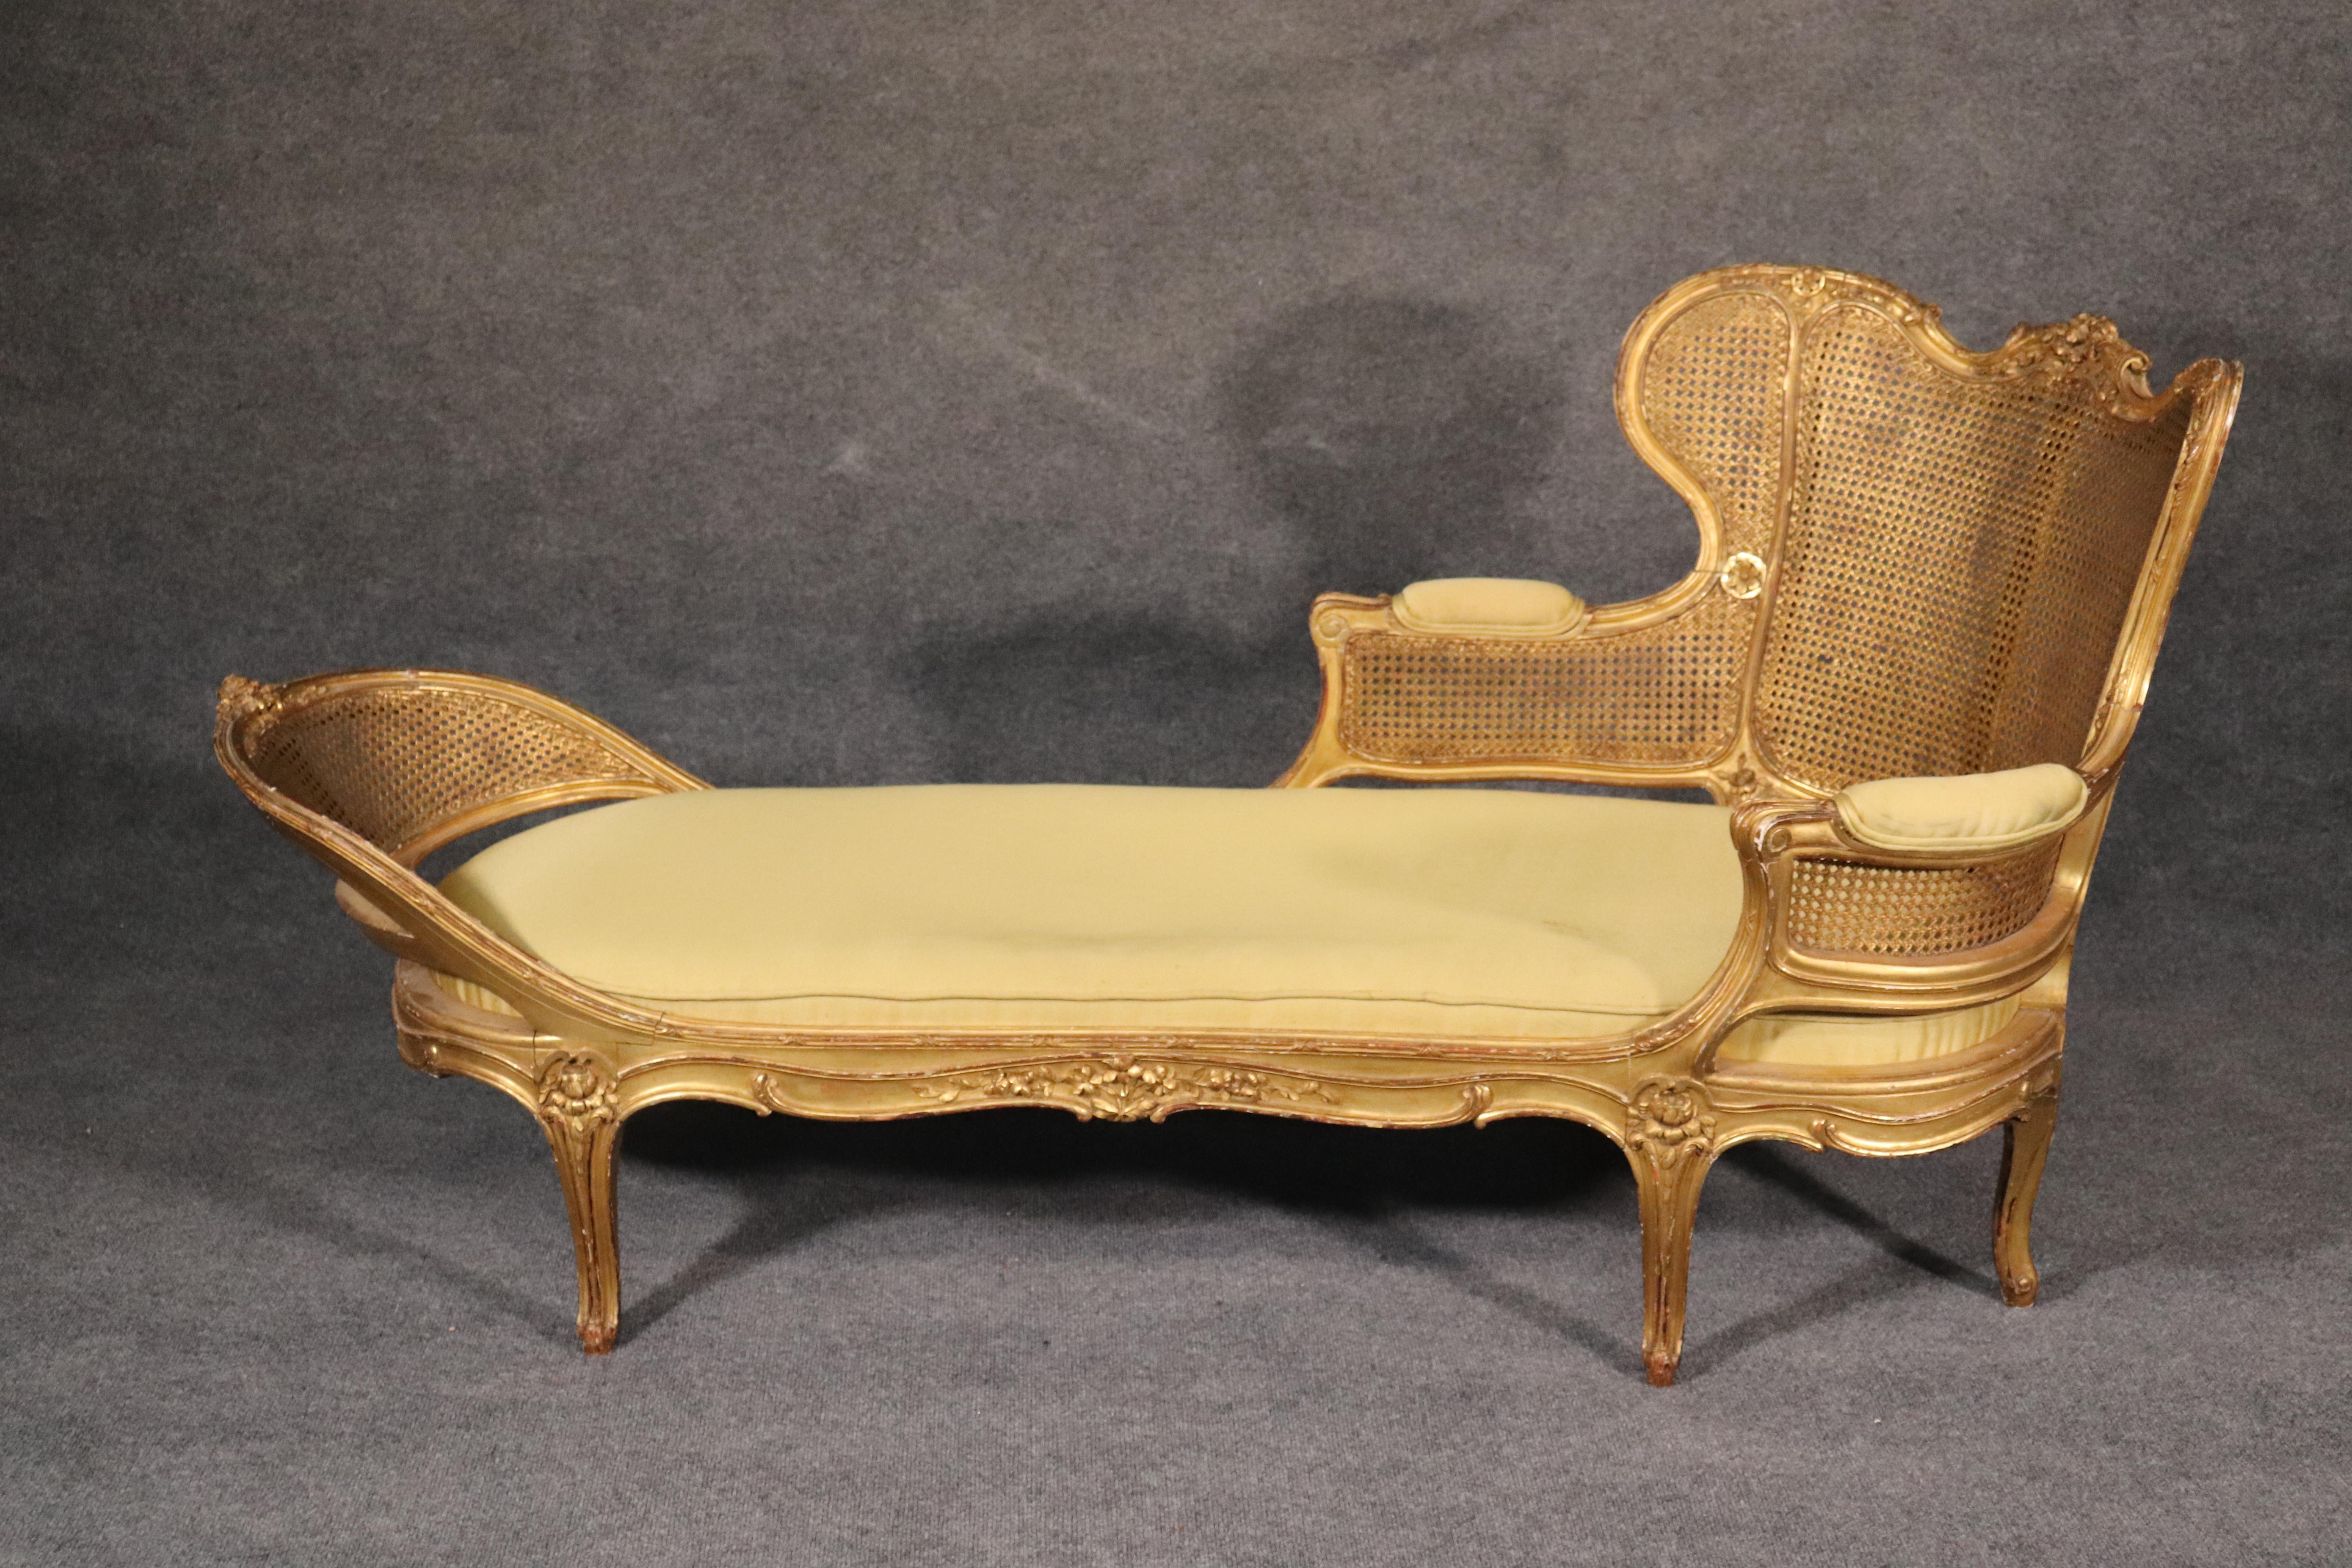 Early 20th Century Fine Gilded Carved French Louis XV Chaise Lounge Daybed Recamier, circa 1900